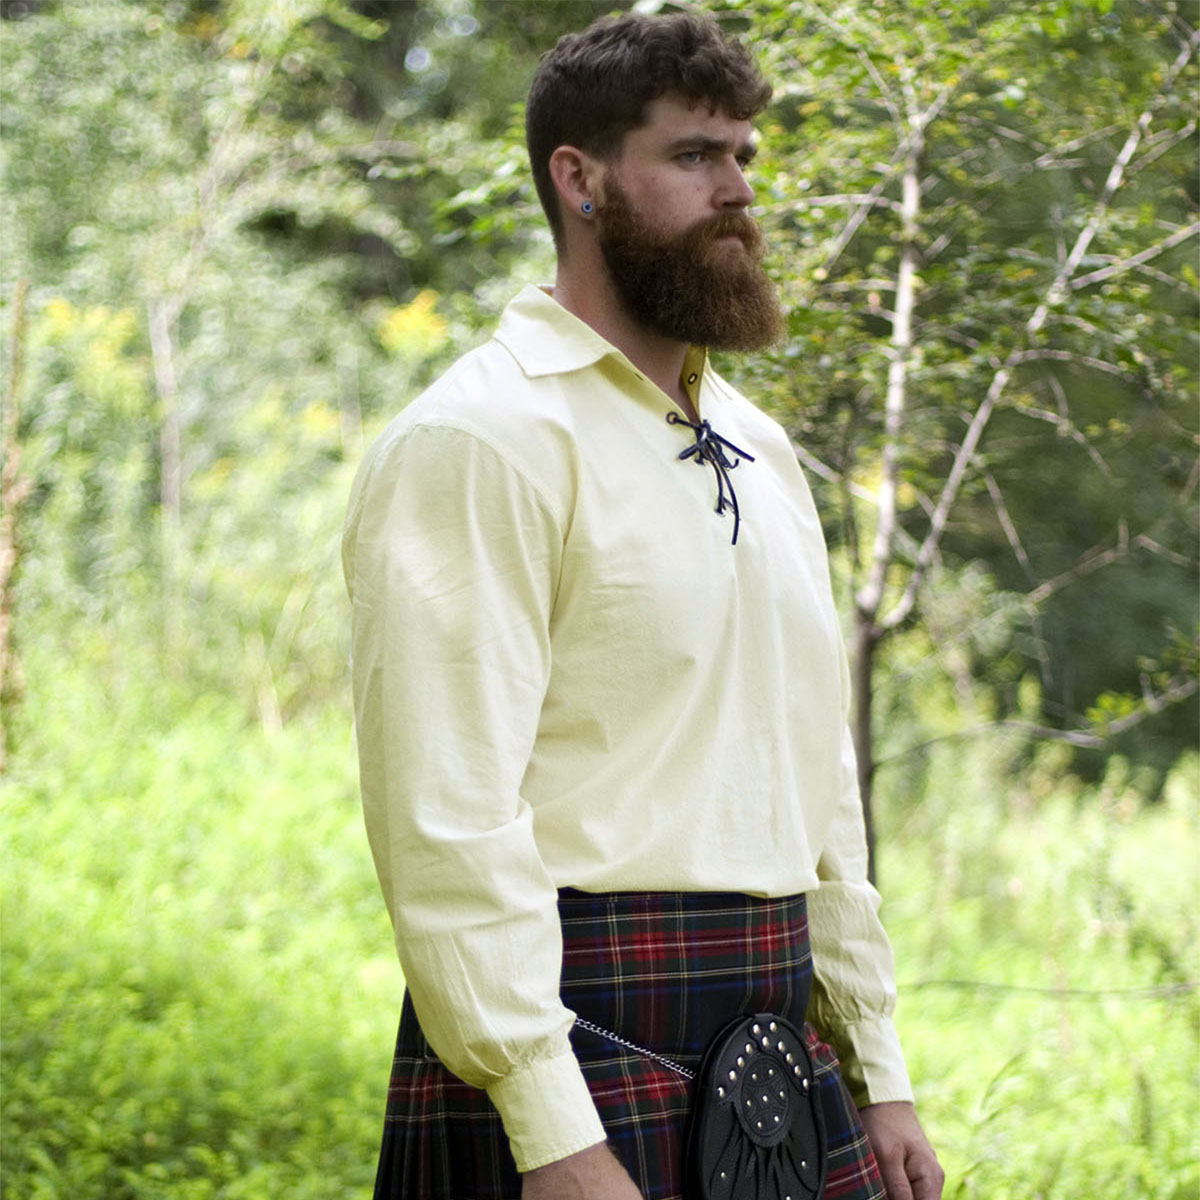 A bearded man in a Traditional Jacobite Kilt Shirt standing in the woods.